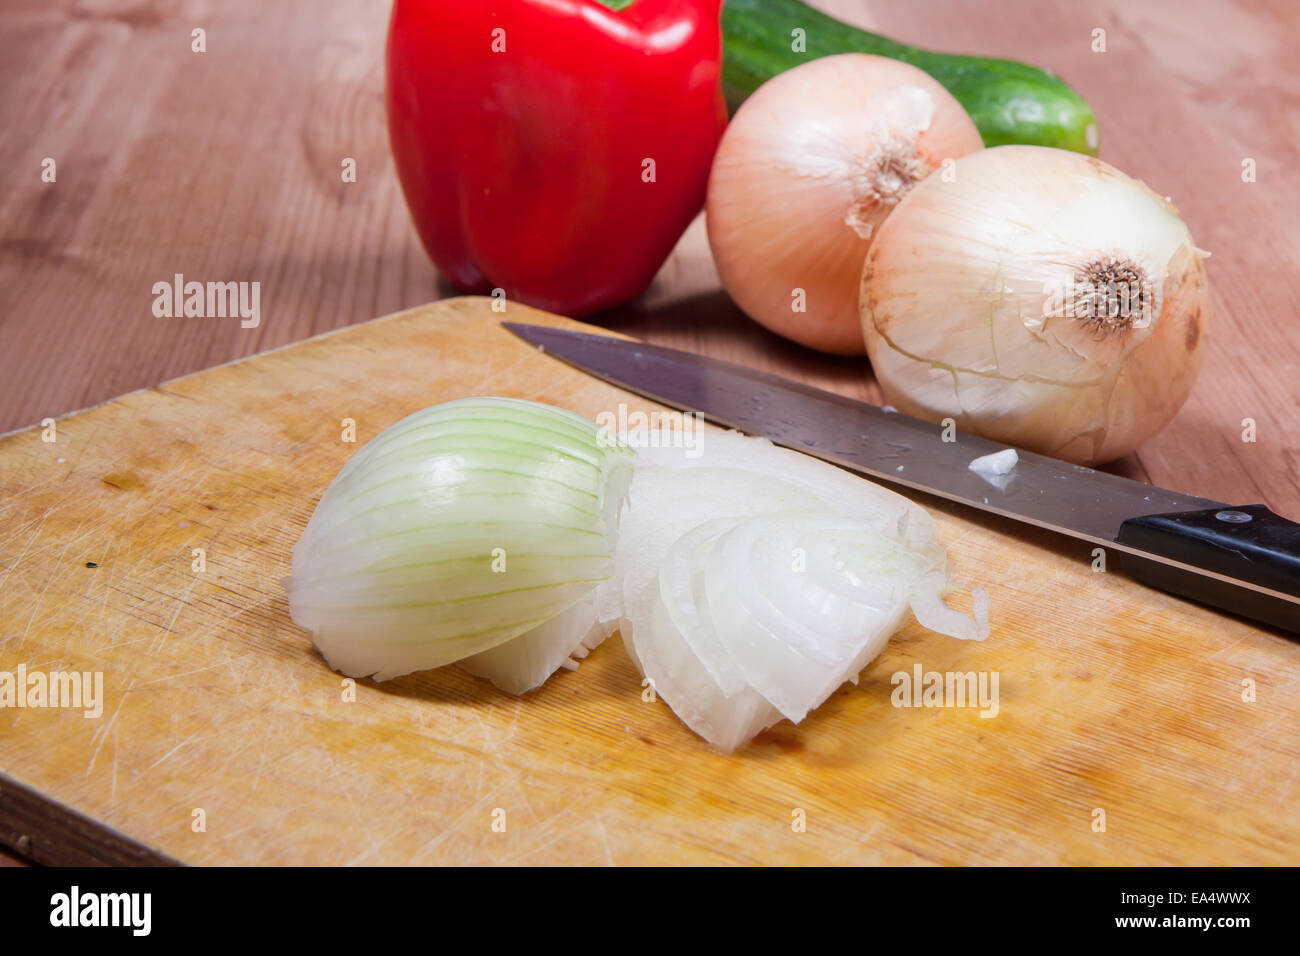 Peeled and sliced onion laying on a cutting board. Stock Photo